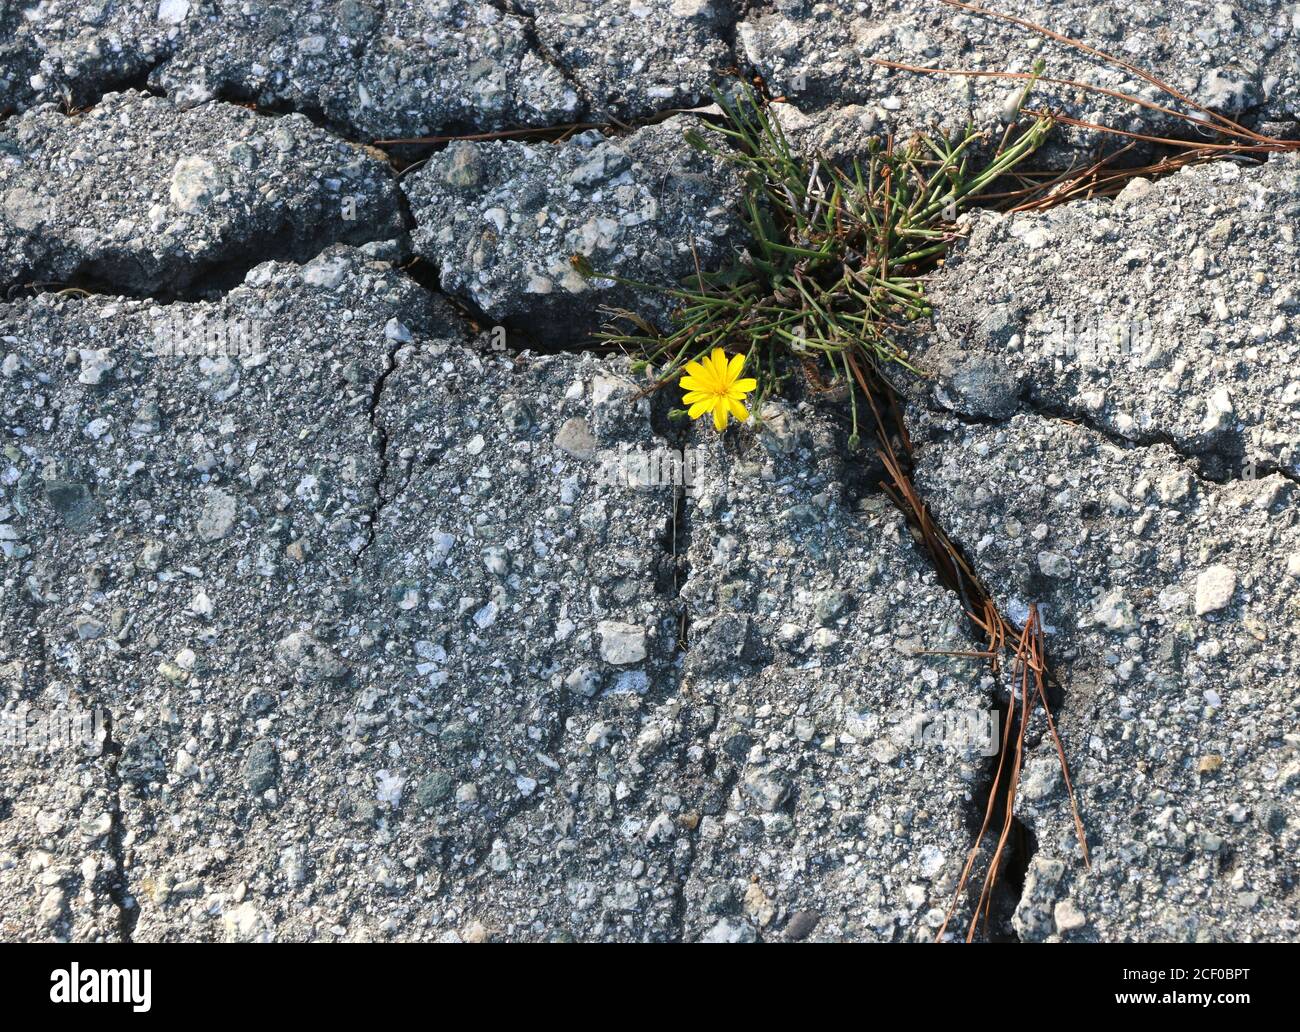 Strong little yellow flower grows up through cracked pavement, a symbol of hope through adversity. Stock Photo